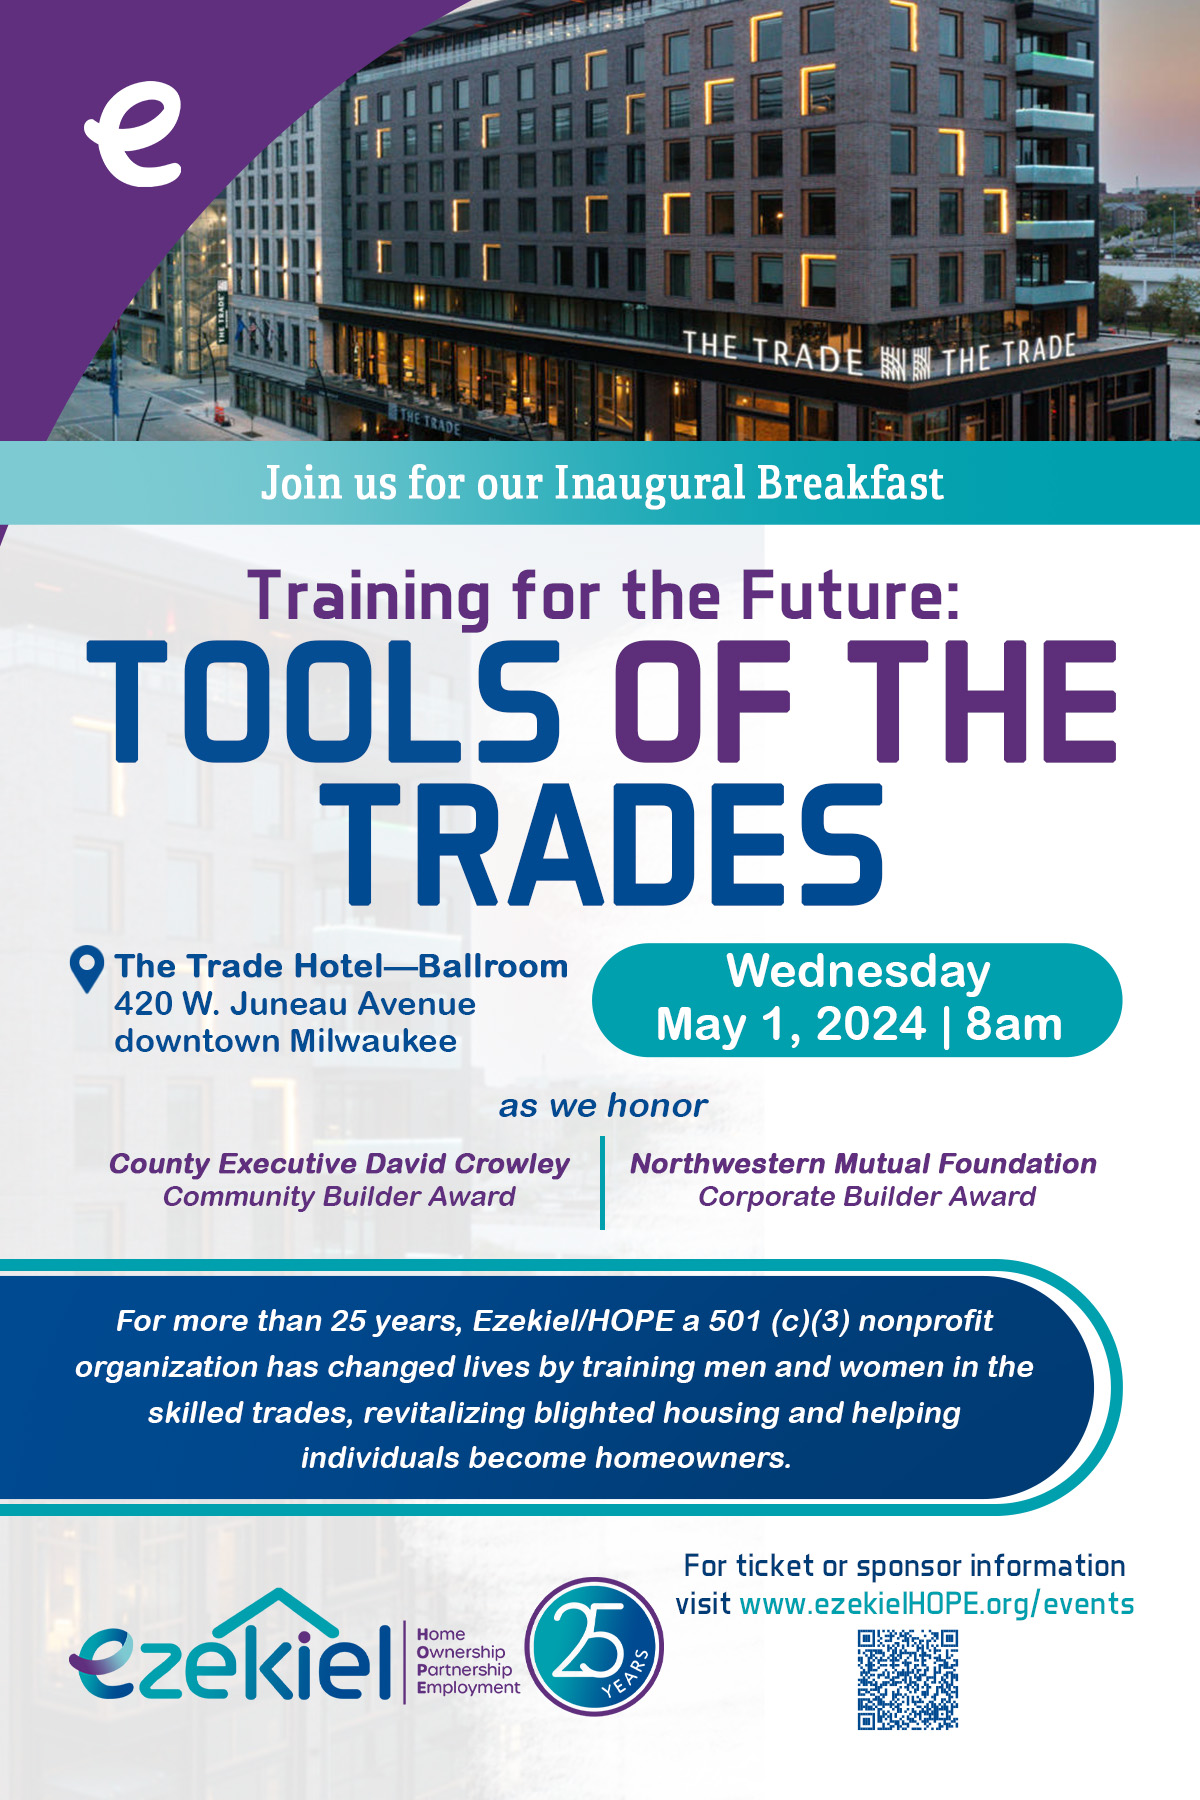 National Skilled Trades Day Program Highlights Need for Tradesmen and Minority Representation